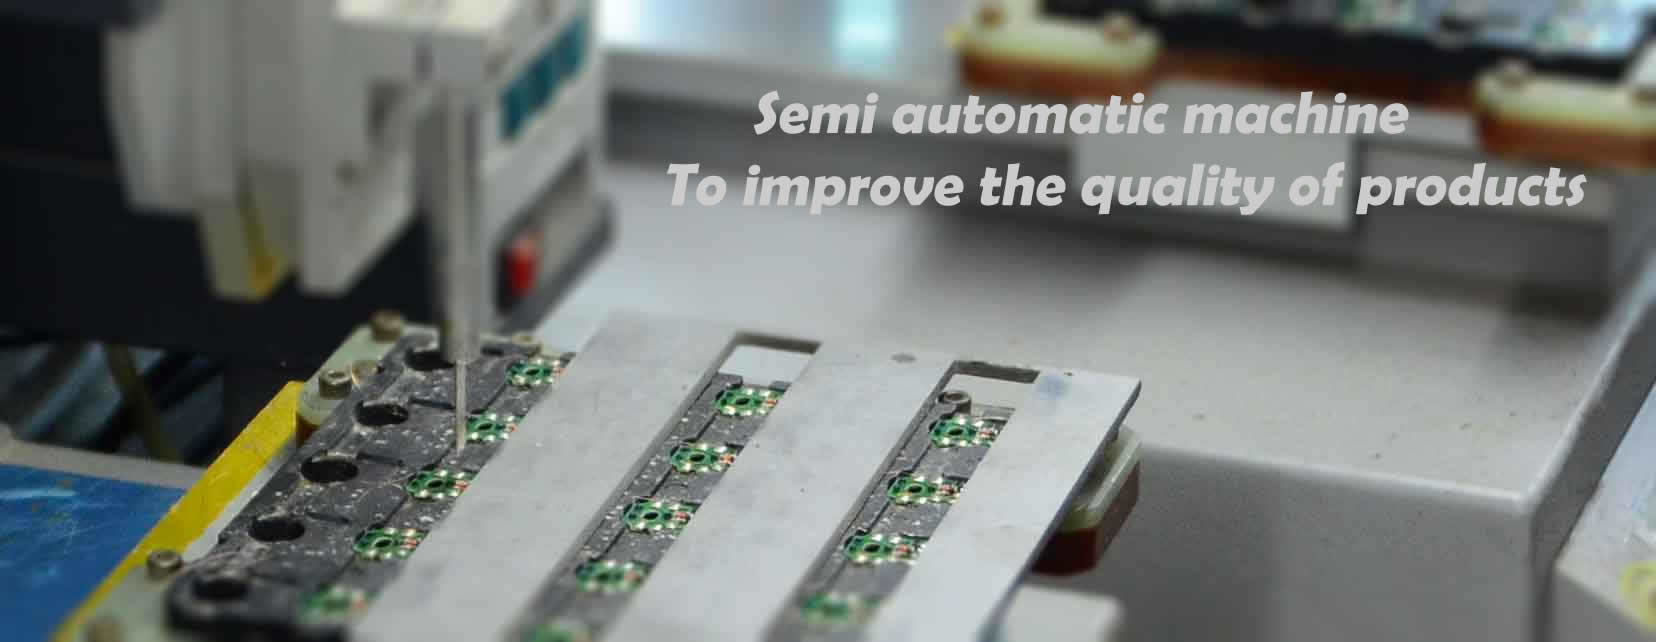 We use semi automatic machine to  improve the quality of products!!!